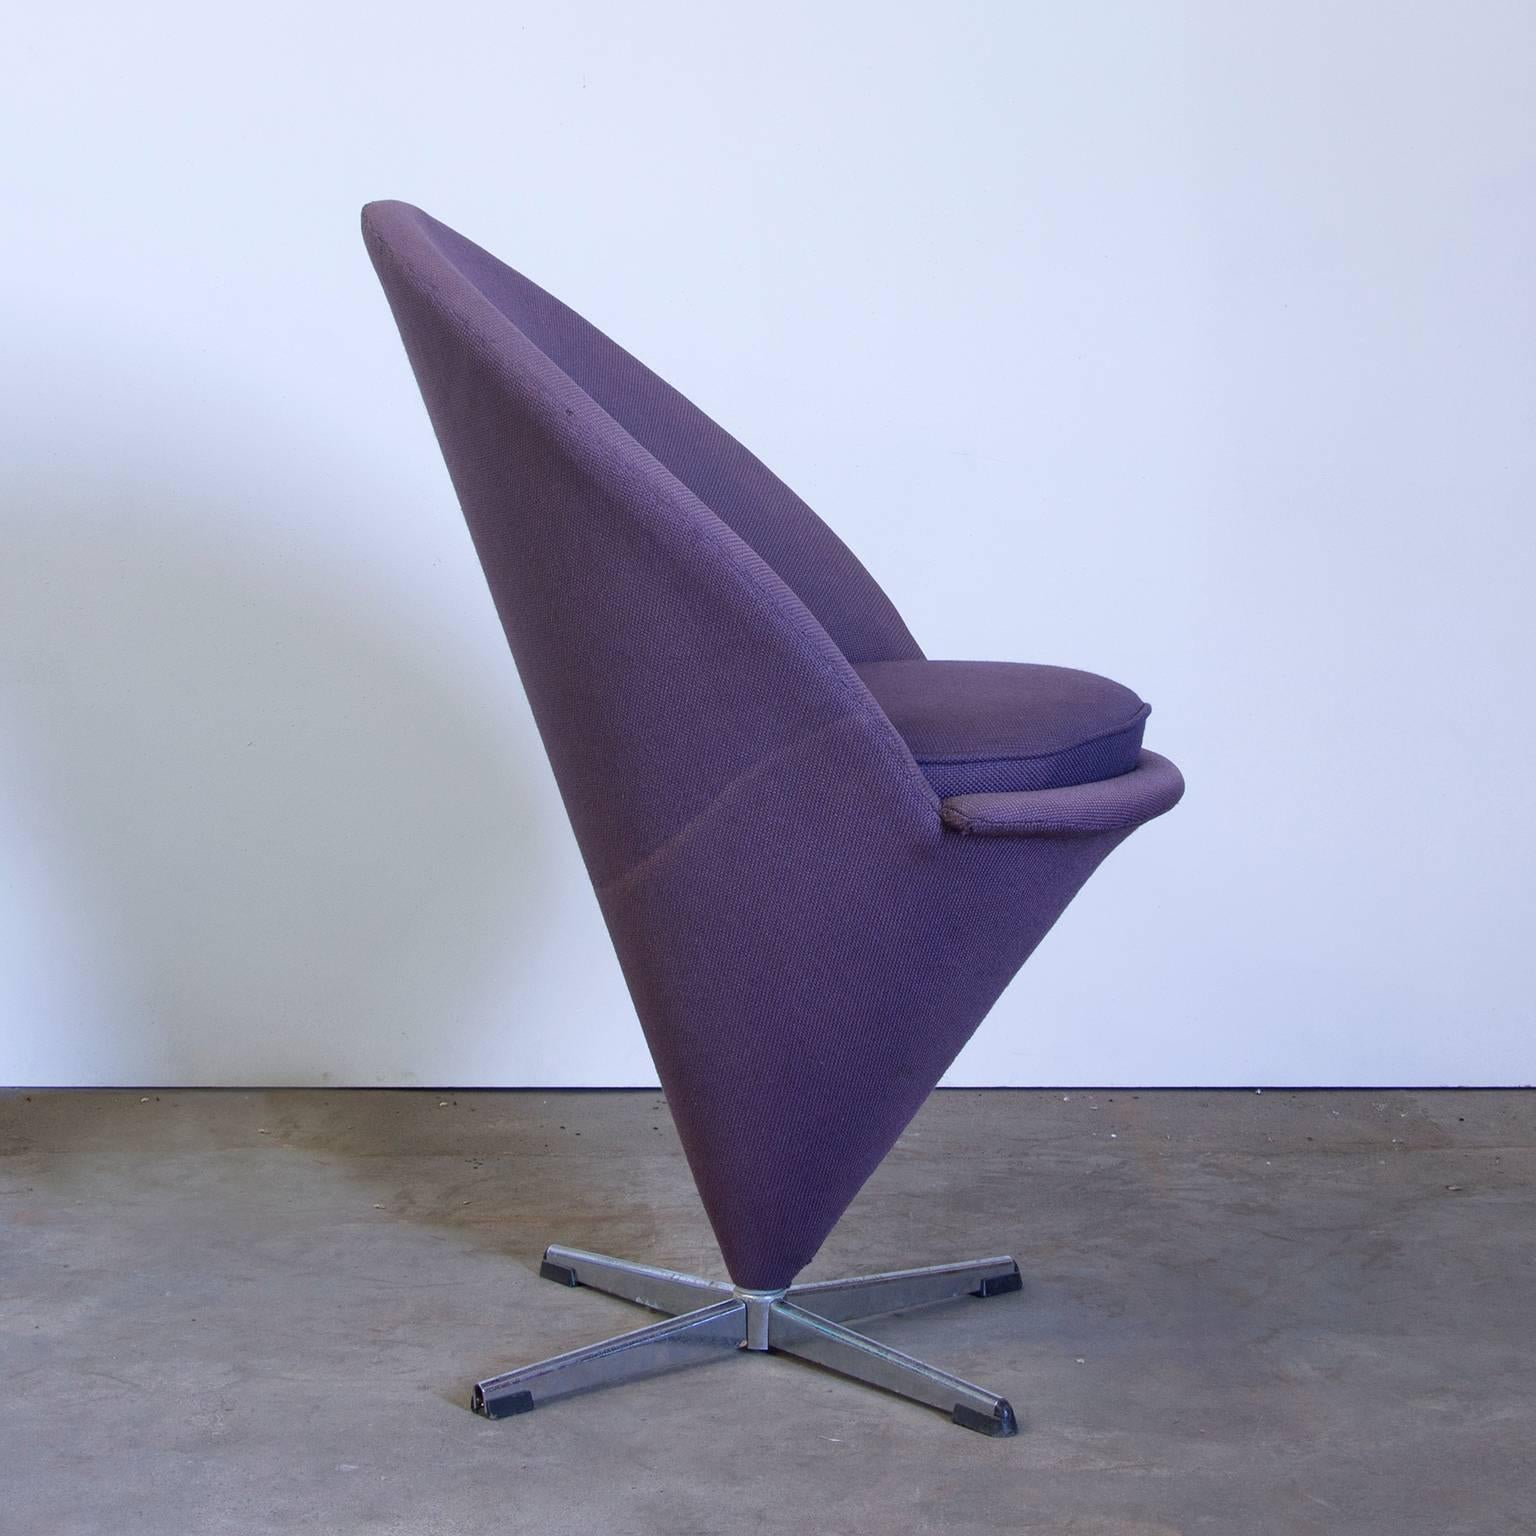 Cone chair in purple. 

Iconic chair, comfortable as side chair or dining chair. More pieces, in total four in purple, available in different colors, to use as-it-is or to re-uphulstor by us for extra price and time. 
For this chair, in fair